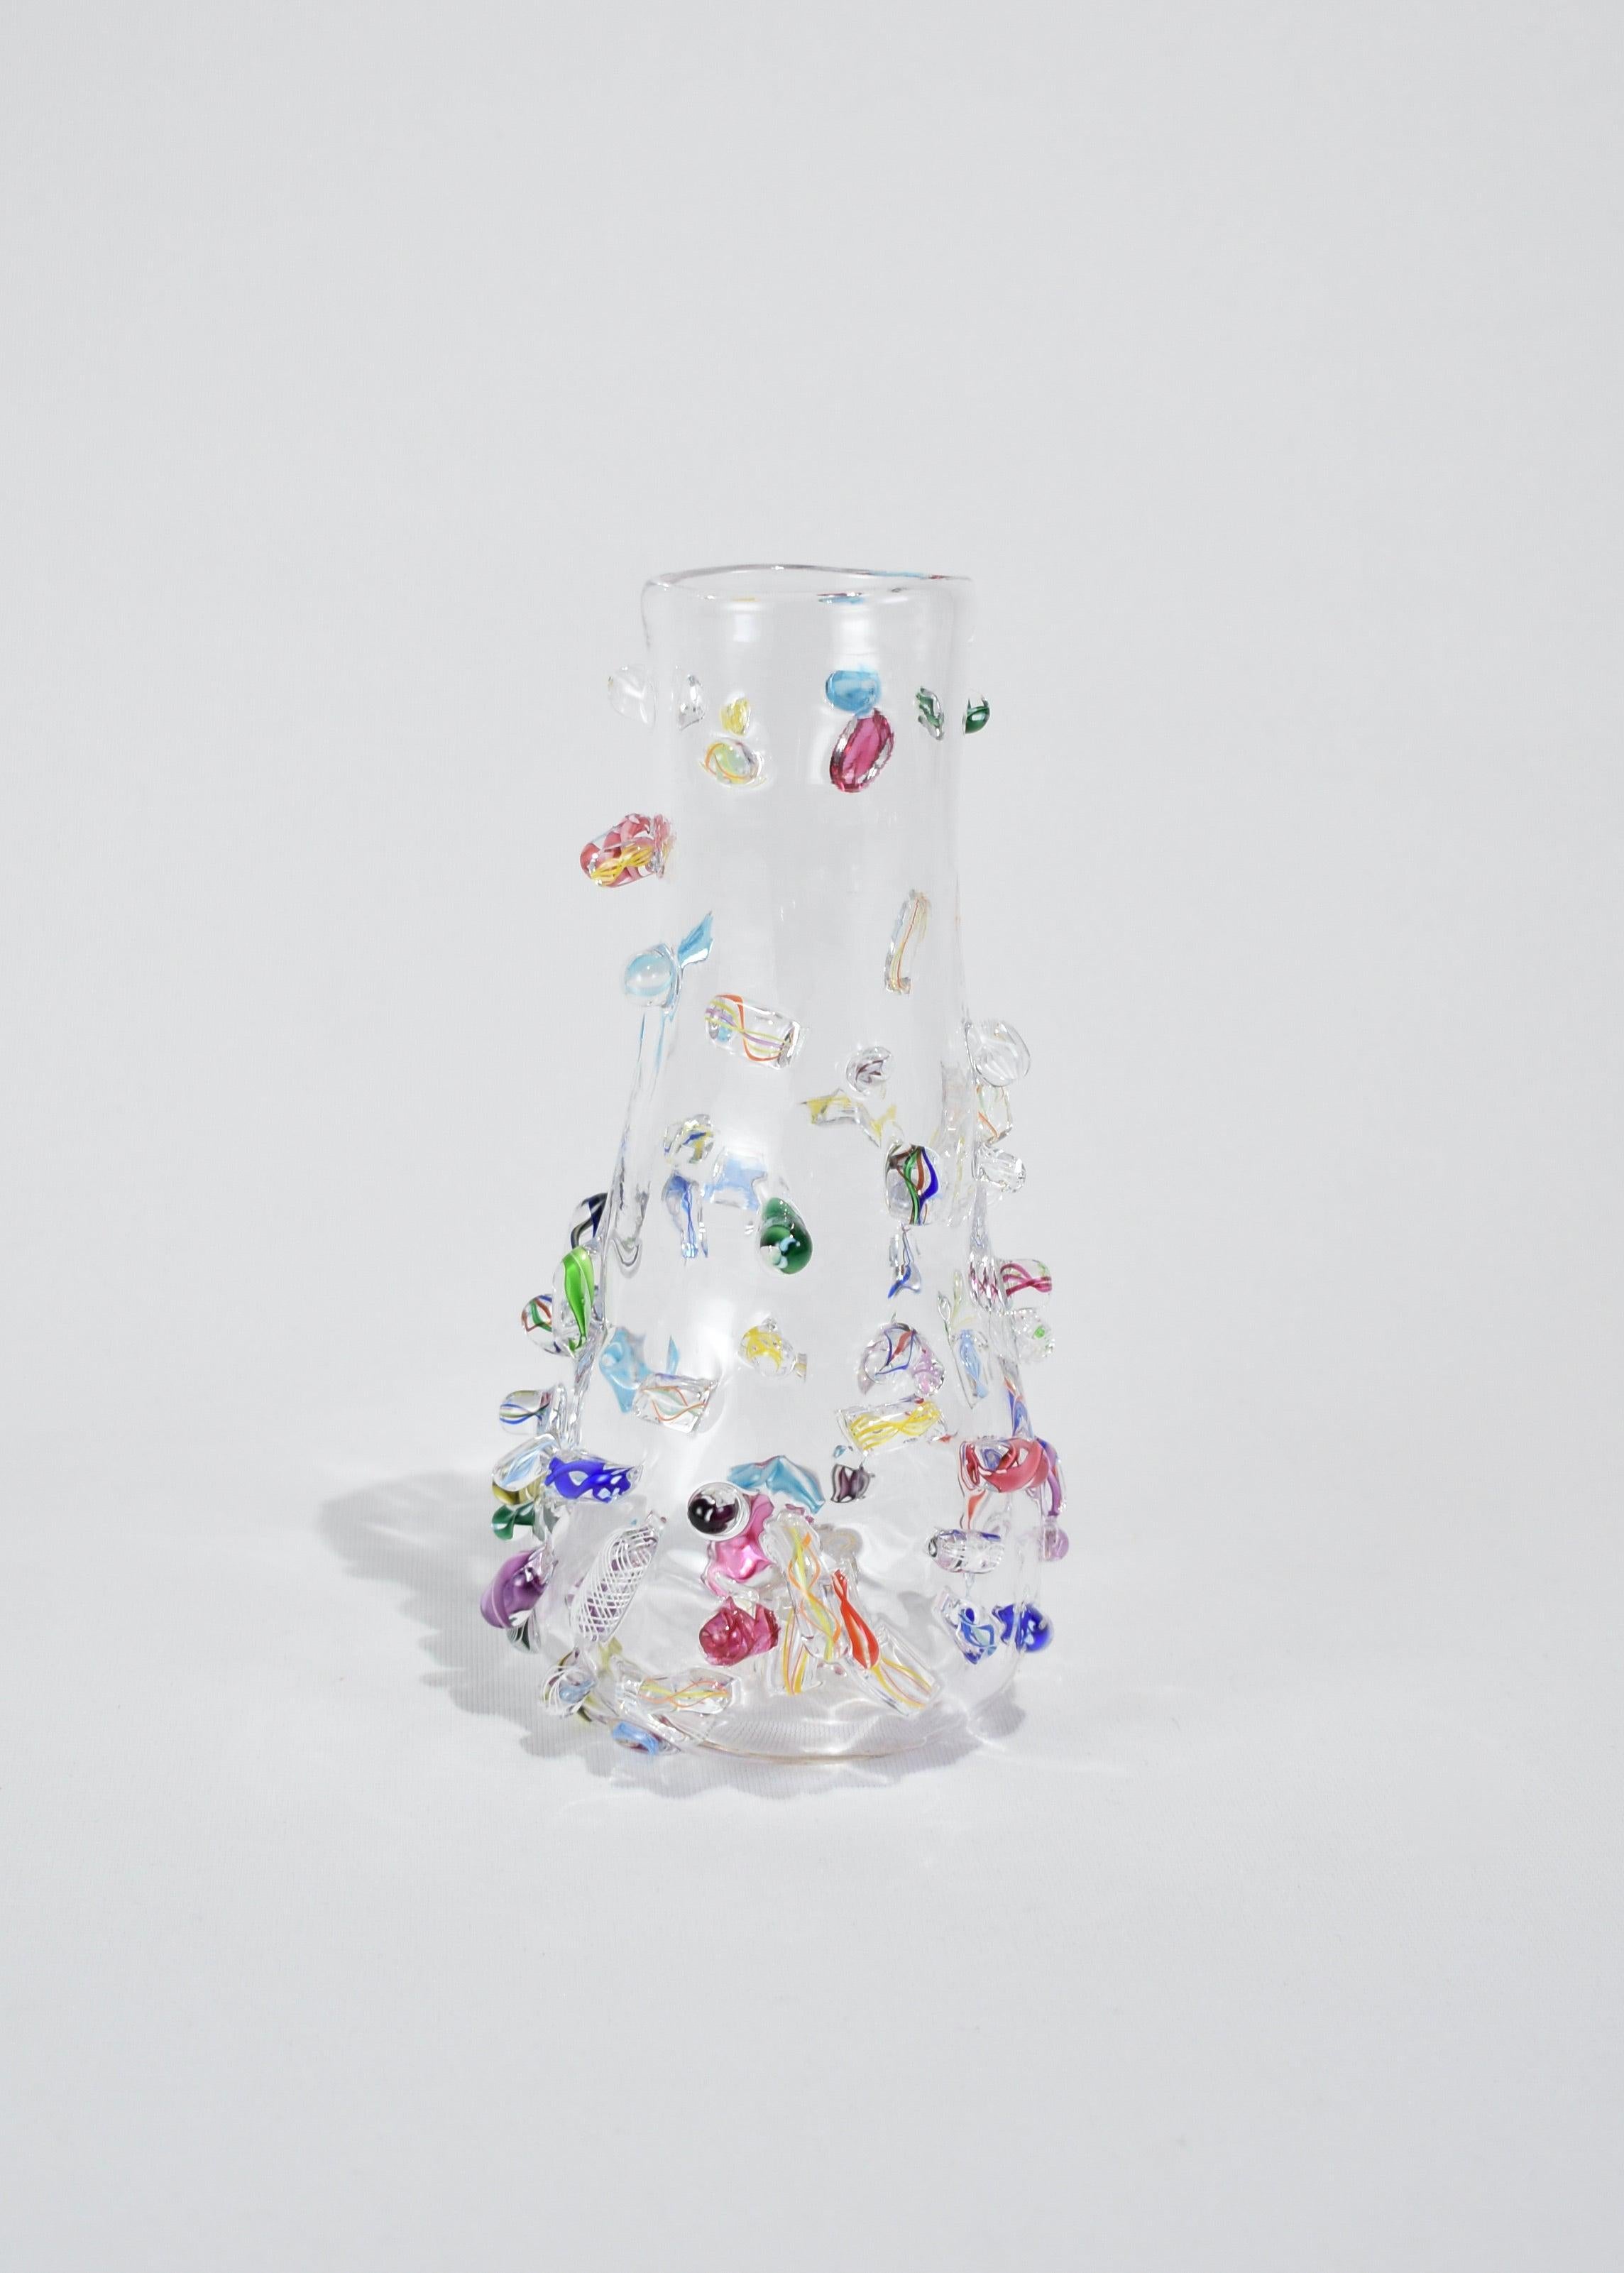 Blown glass stem vase with applied decoration. Handmade in USA by Lisa Stover. Exclusive to Casa Shop.

Please note: Due to the handmade nature, subtle variations in form and finish are to be expected.
Dimensions
Height: approximately 7 in